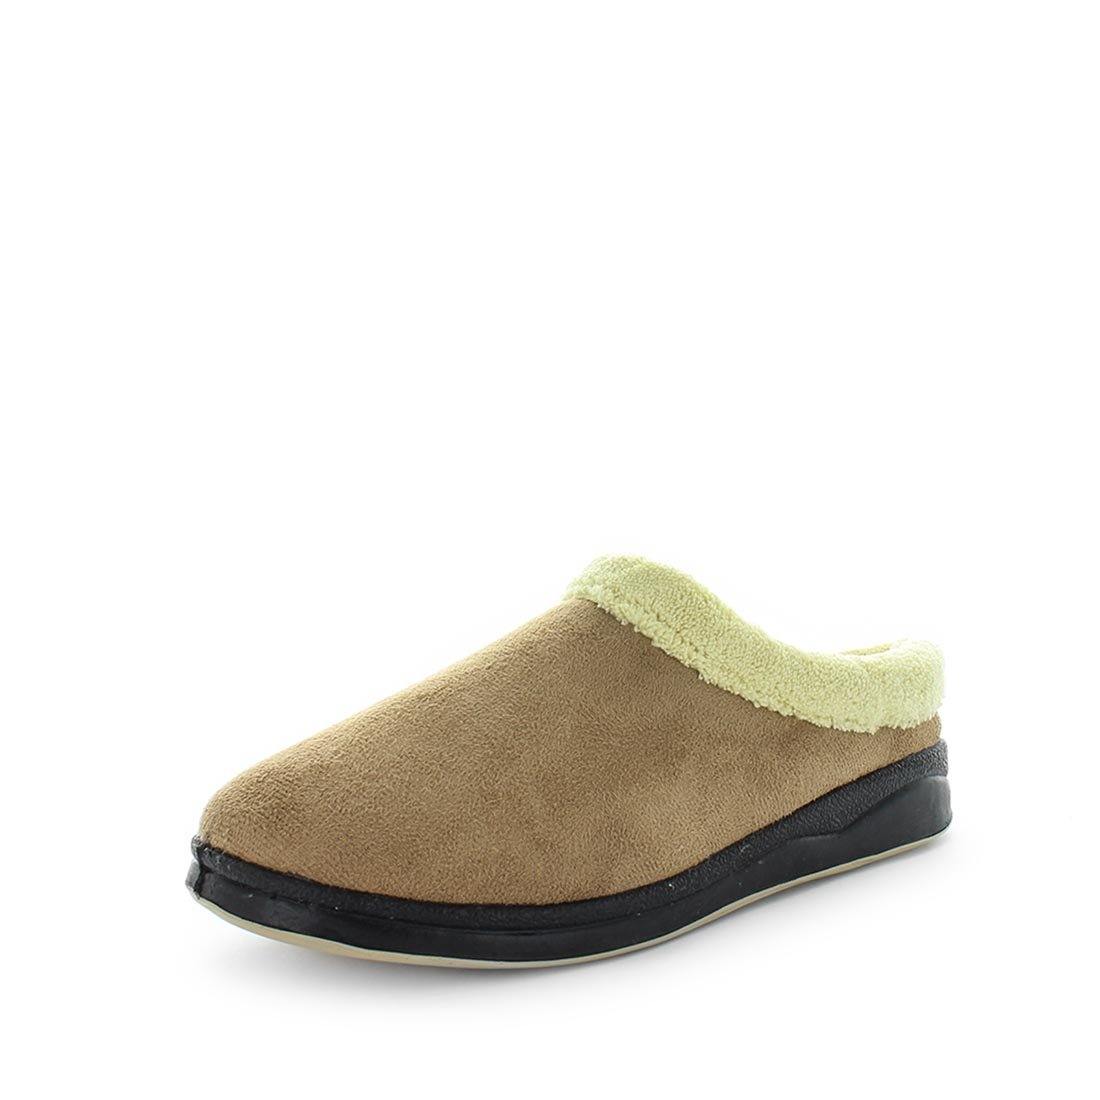 Load image into Gallery viewer, womens slippers - camel Endy slipper, by panda Slippers. A scuff style slipper with a micro-terry design for warmth and an extra comfy fit with anon slip sole - comfort womens slippers
